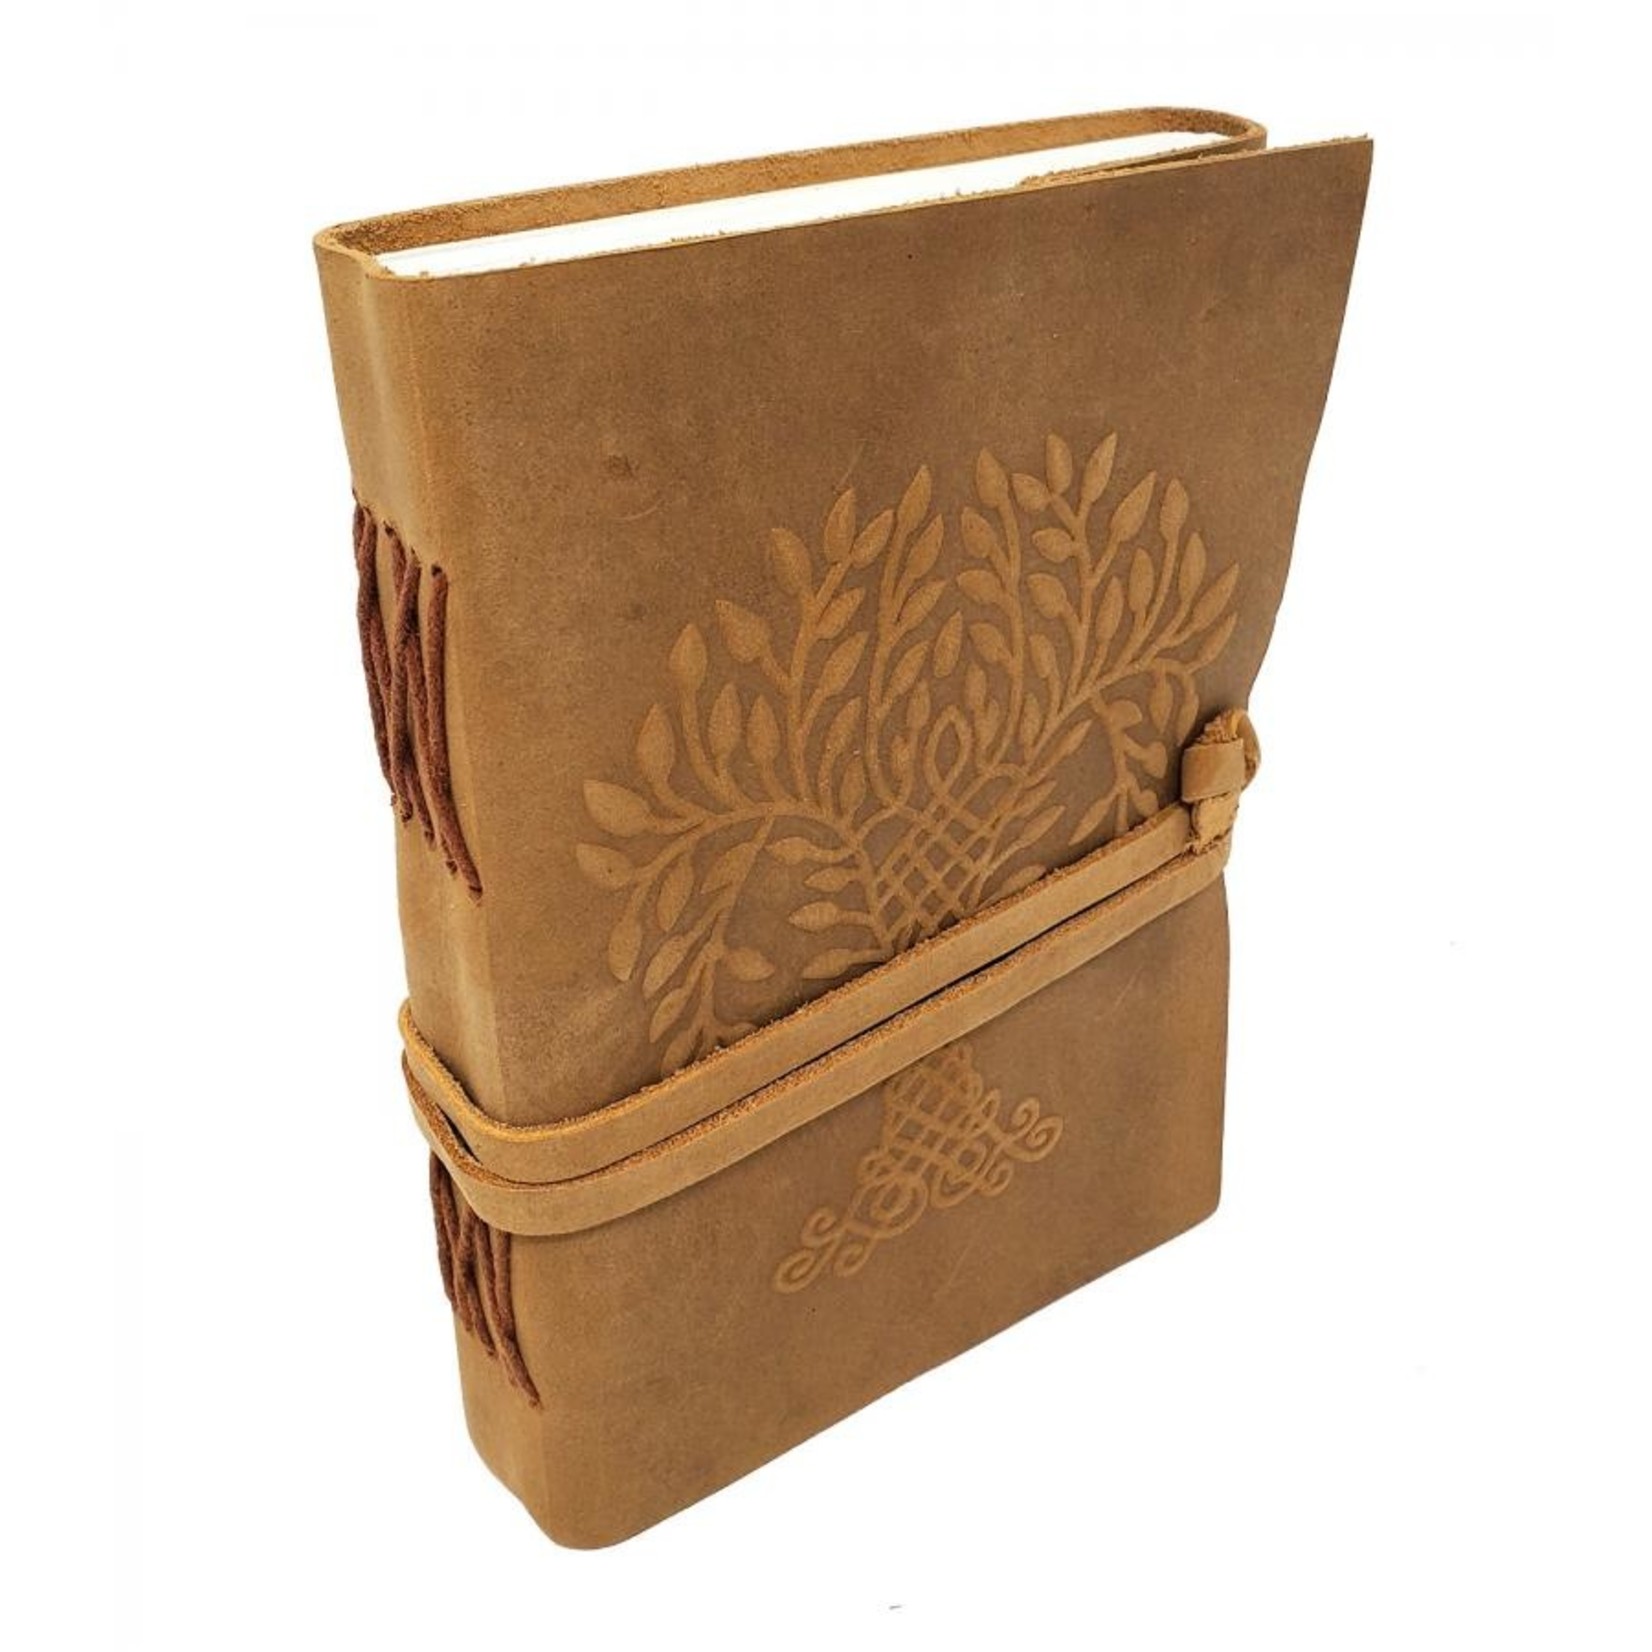 Tree of Life Soft Leather Journal 5x7" with Leather Cord Closure